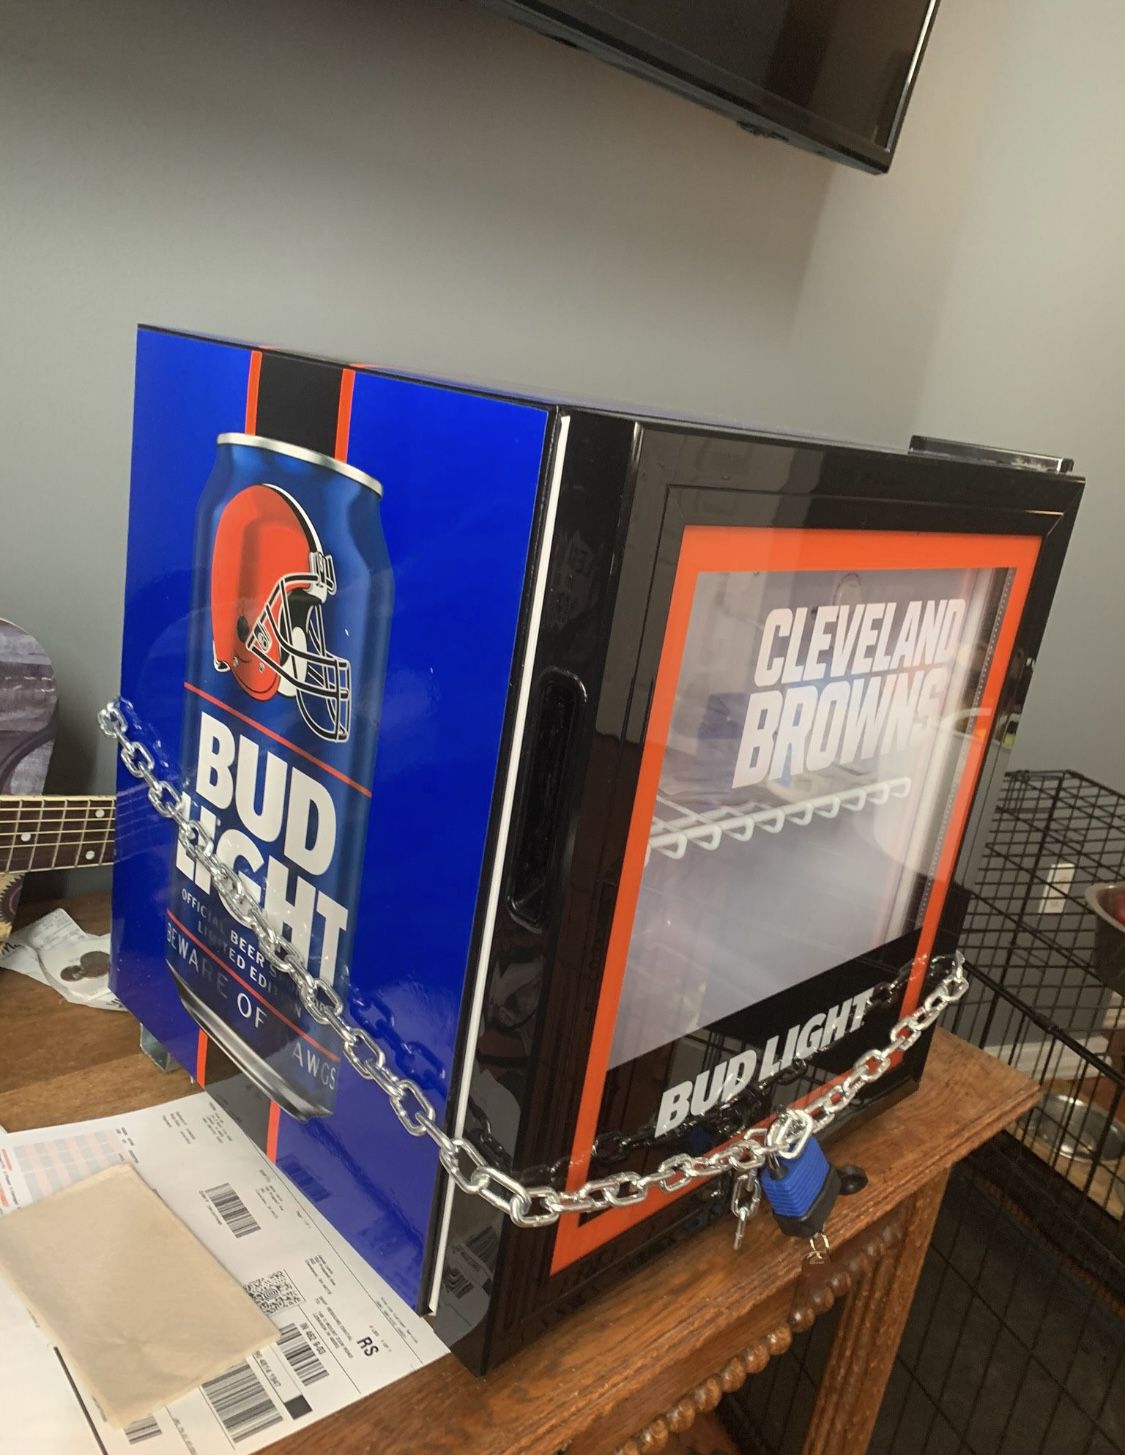 cleveland browns victory fridge